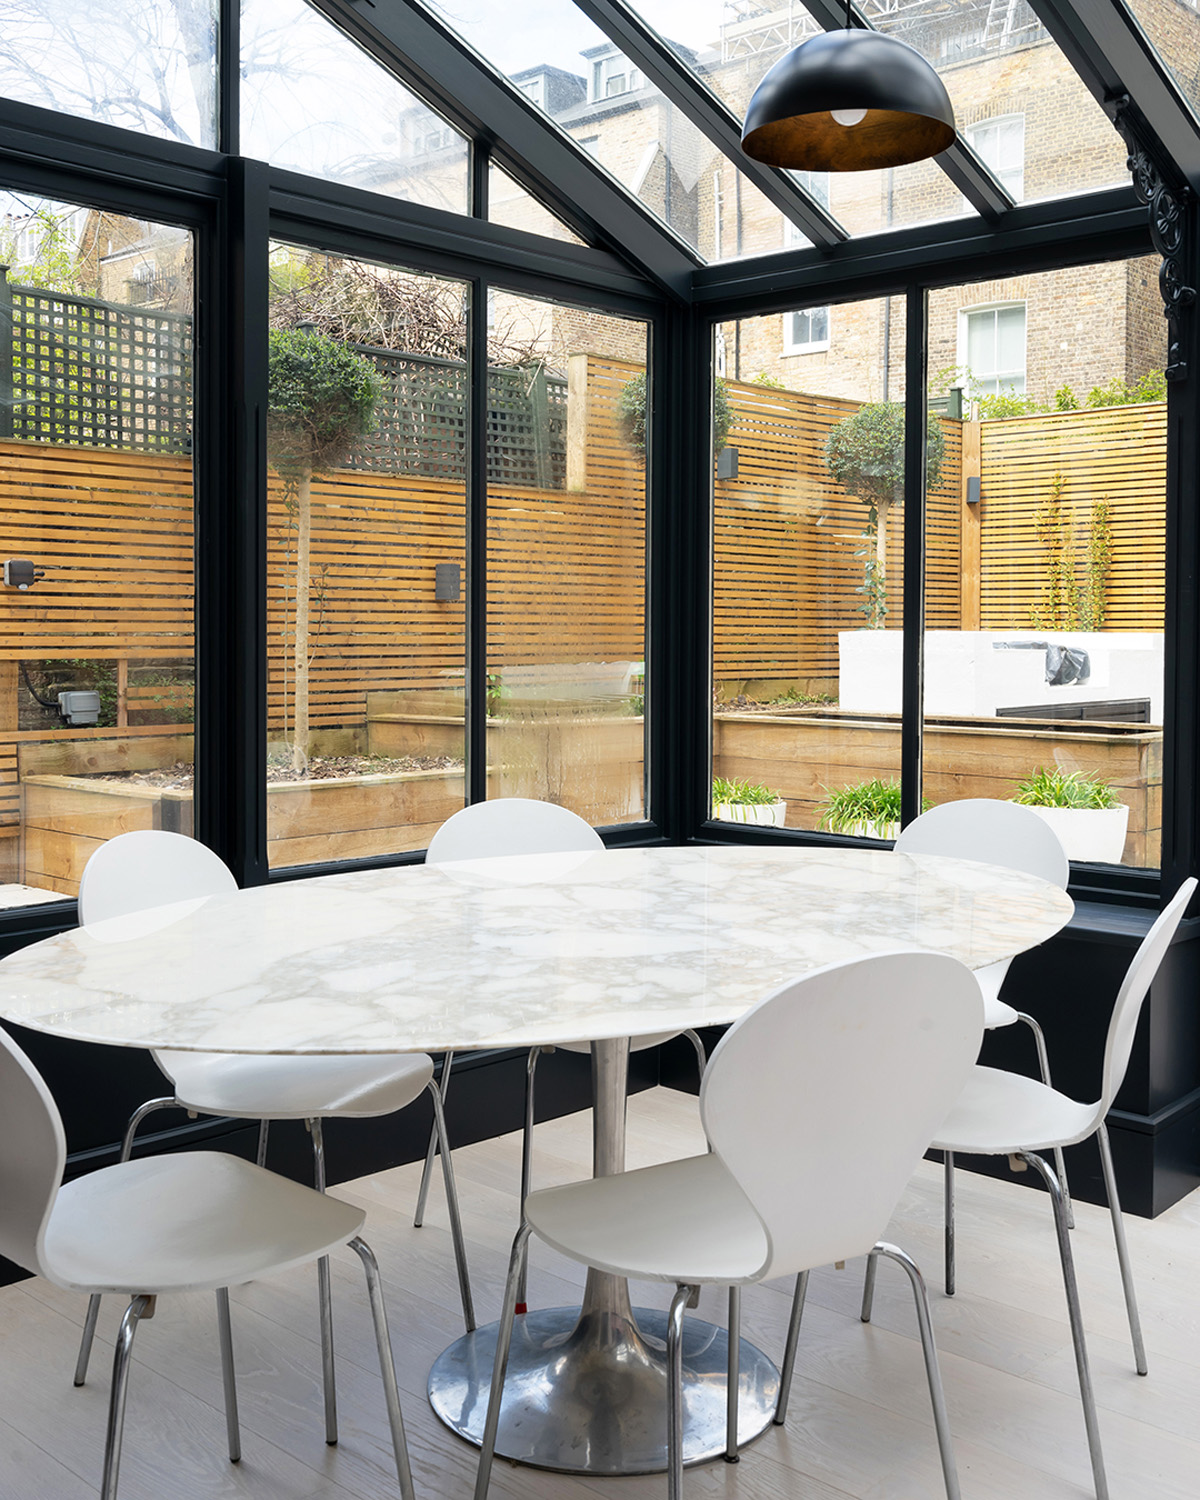 For Sale: Cambridge Gardens Notting Hill W11 Crittall windows and skylights with modern dining table